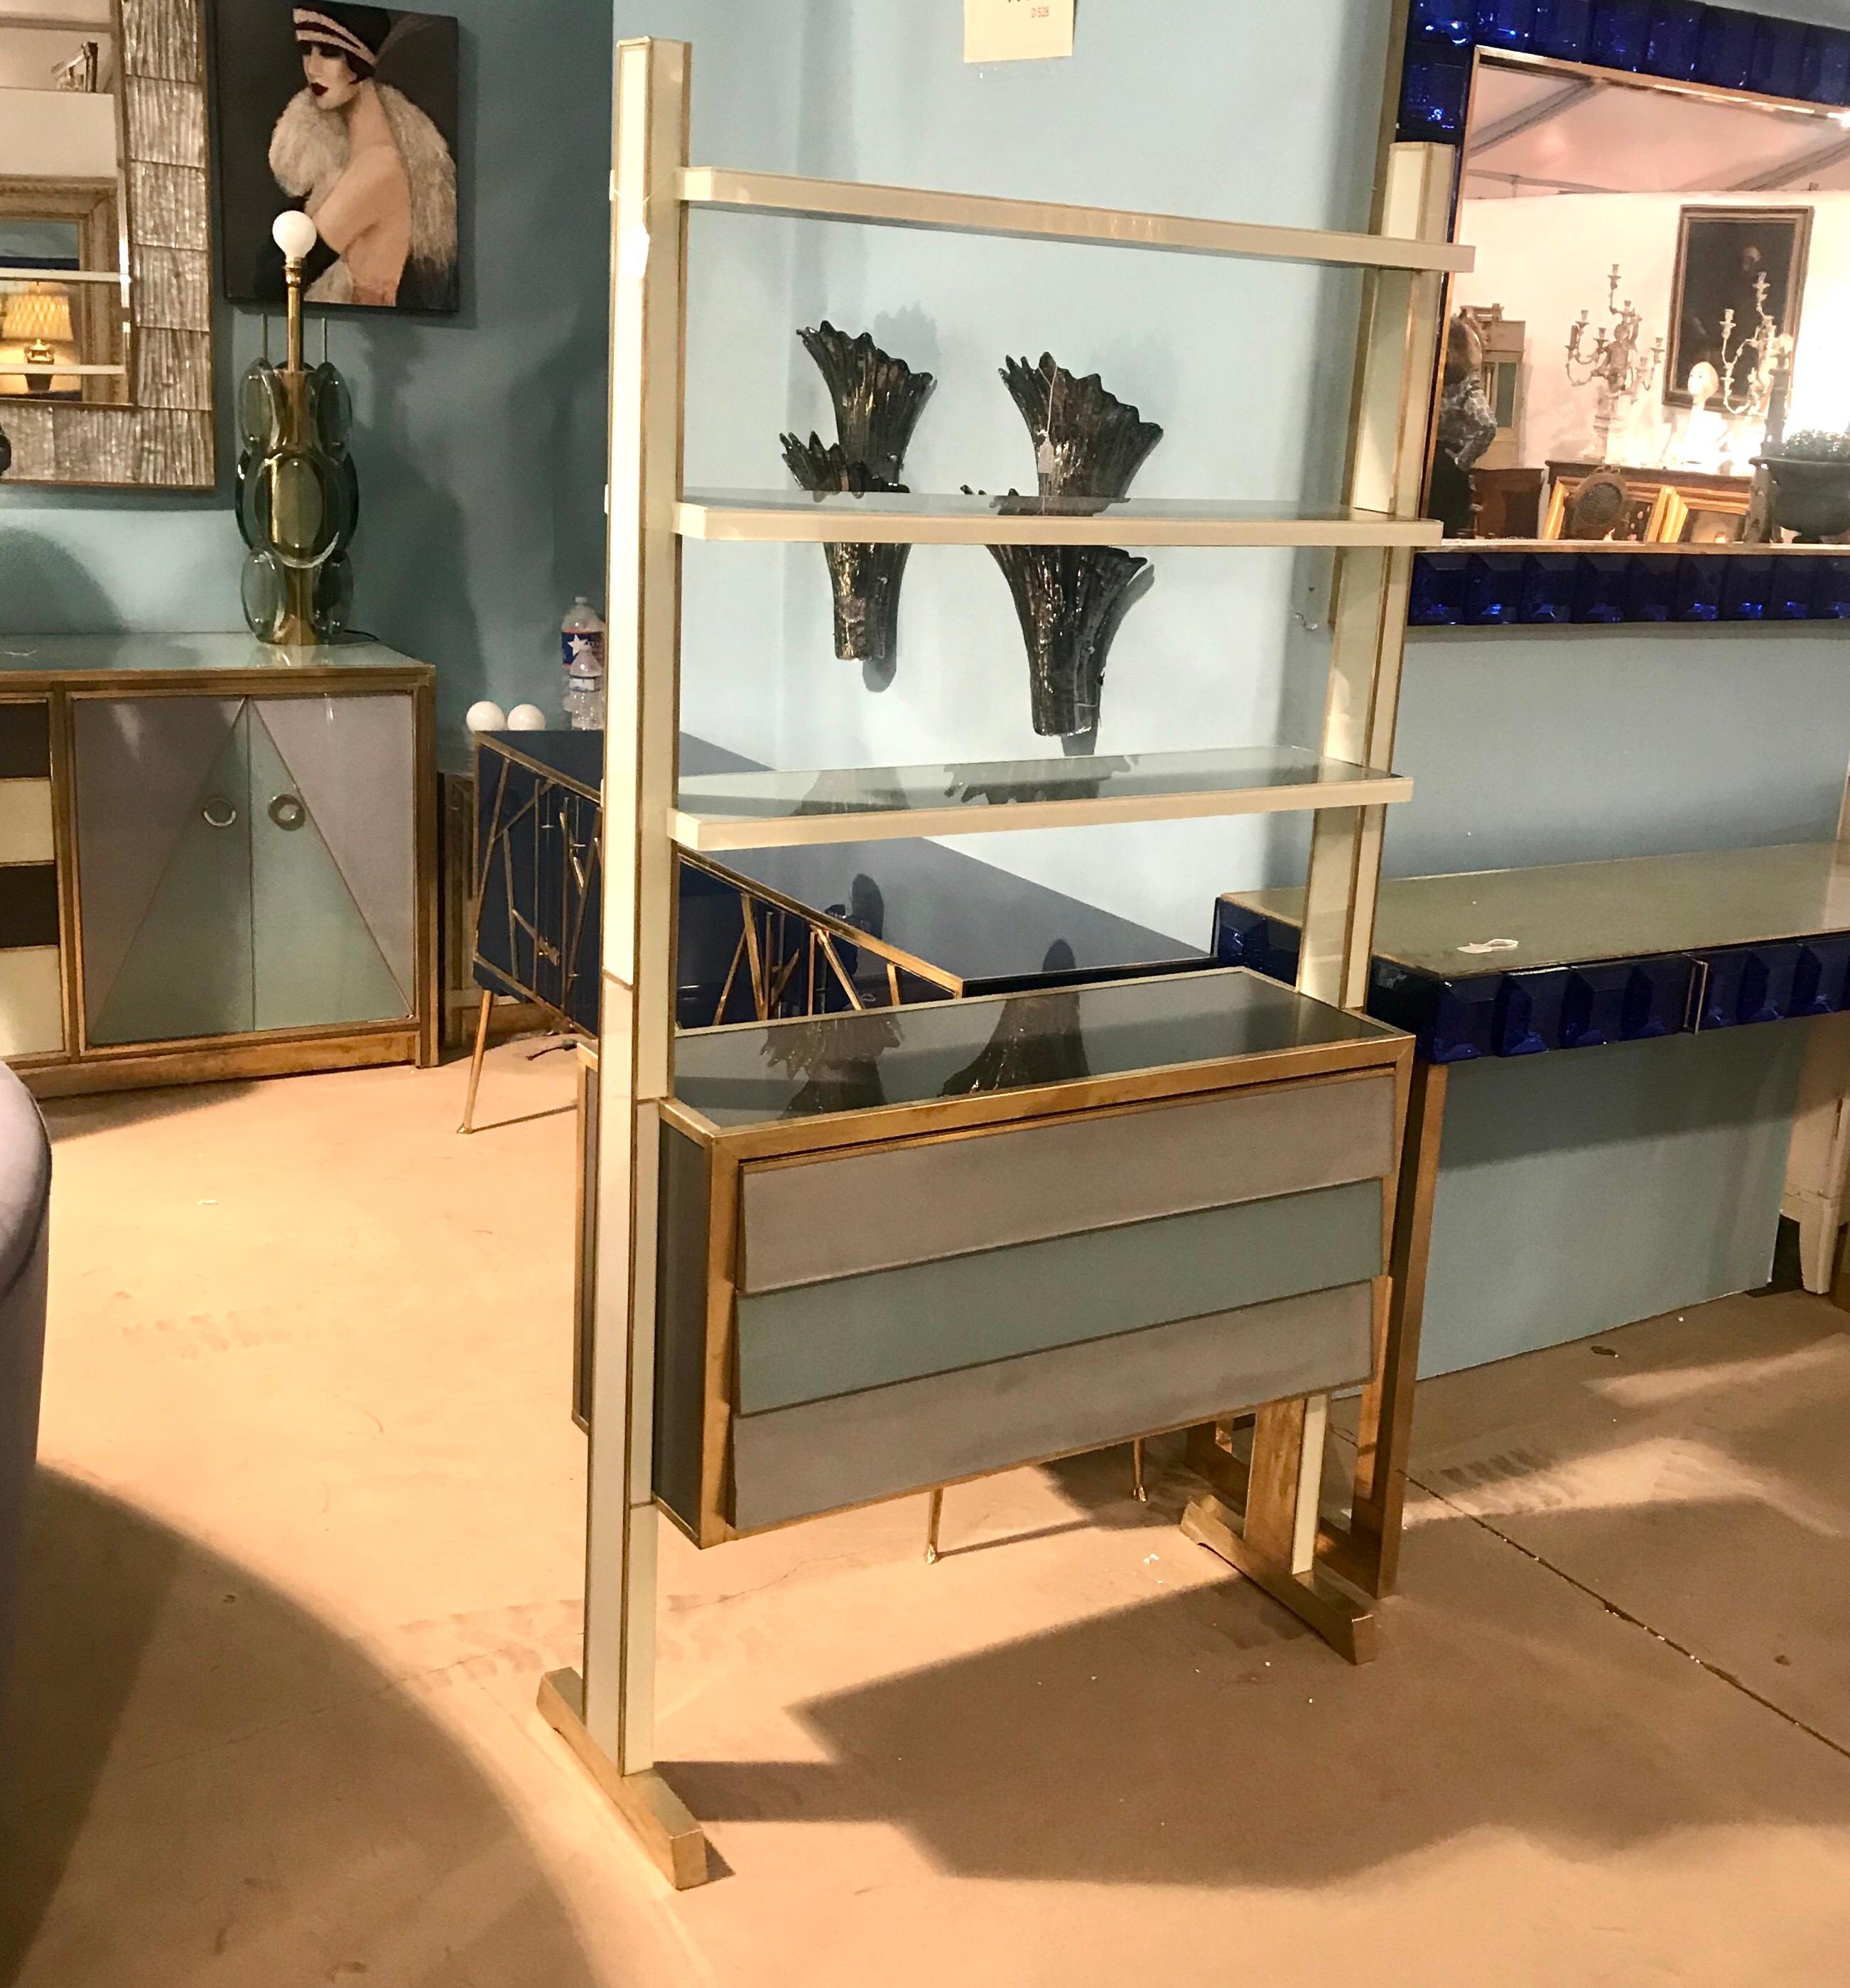 Hues of blue gray reverse painted glass adorn this unique Italian midcentury shelving unit with drawers and brass accents.